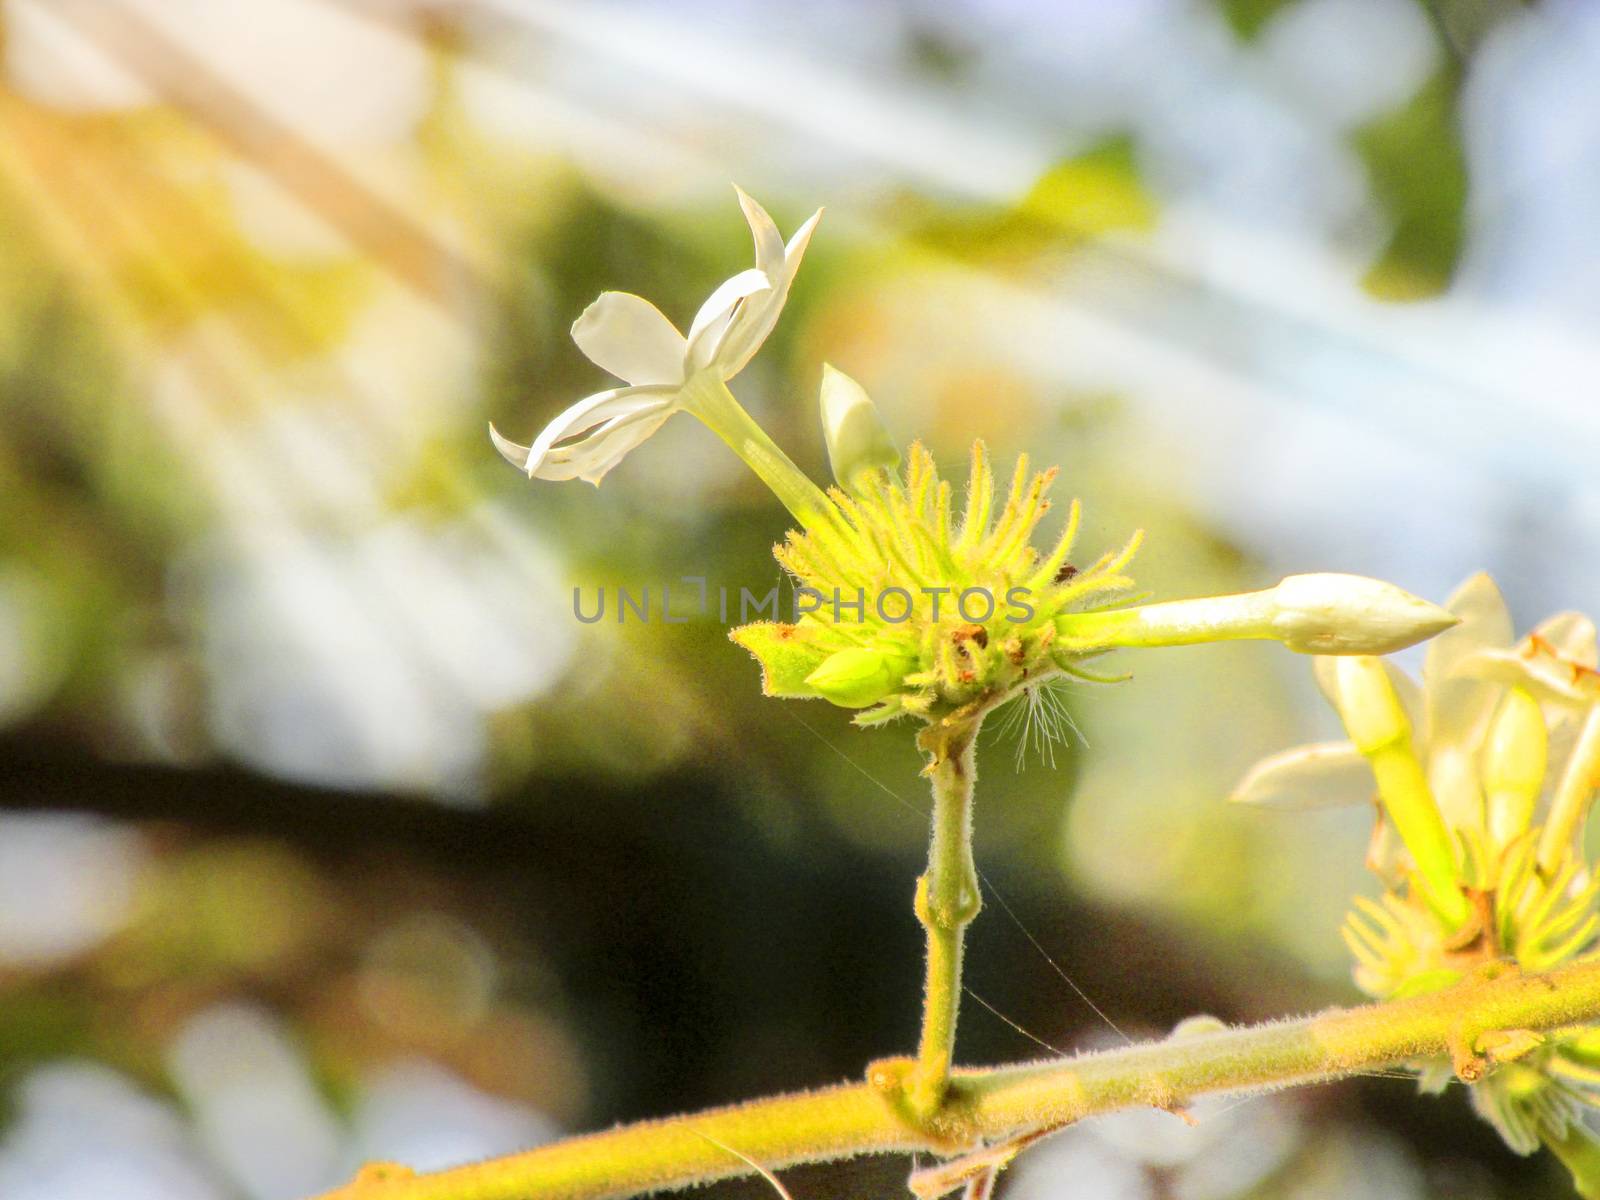 Sweet smelling white starJasmin flower on falling Sun in the afternoon,ray of light falling on the flowers...Newe hope coming...taken on 02.12.2014